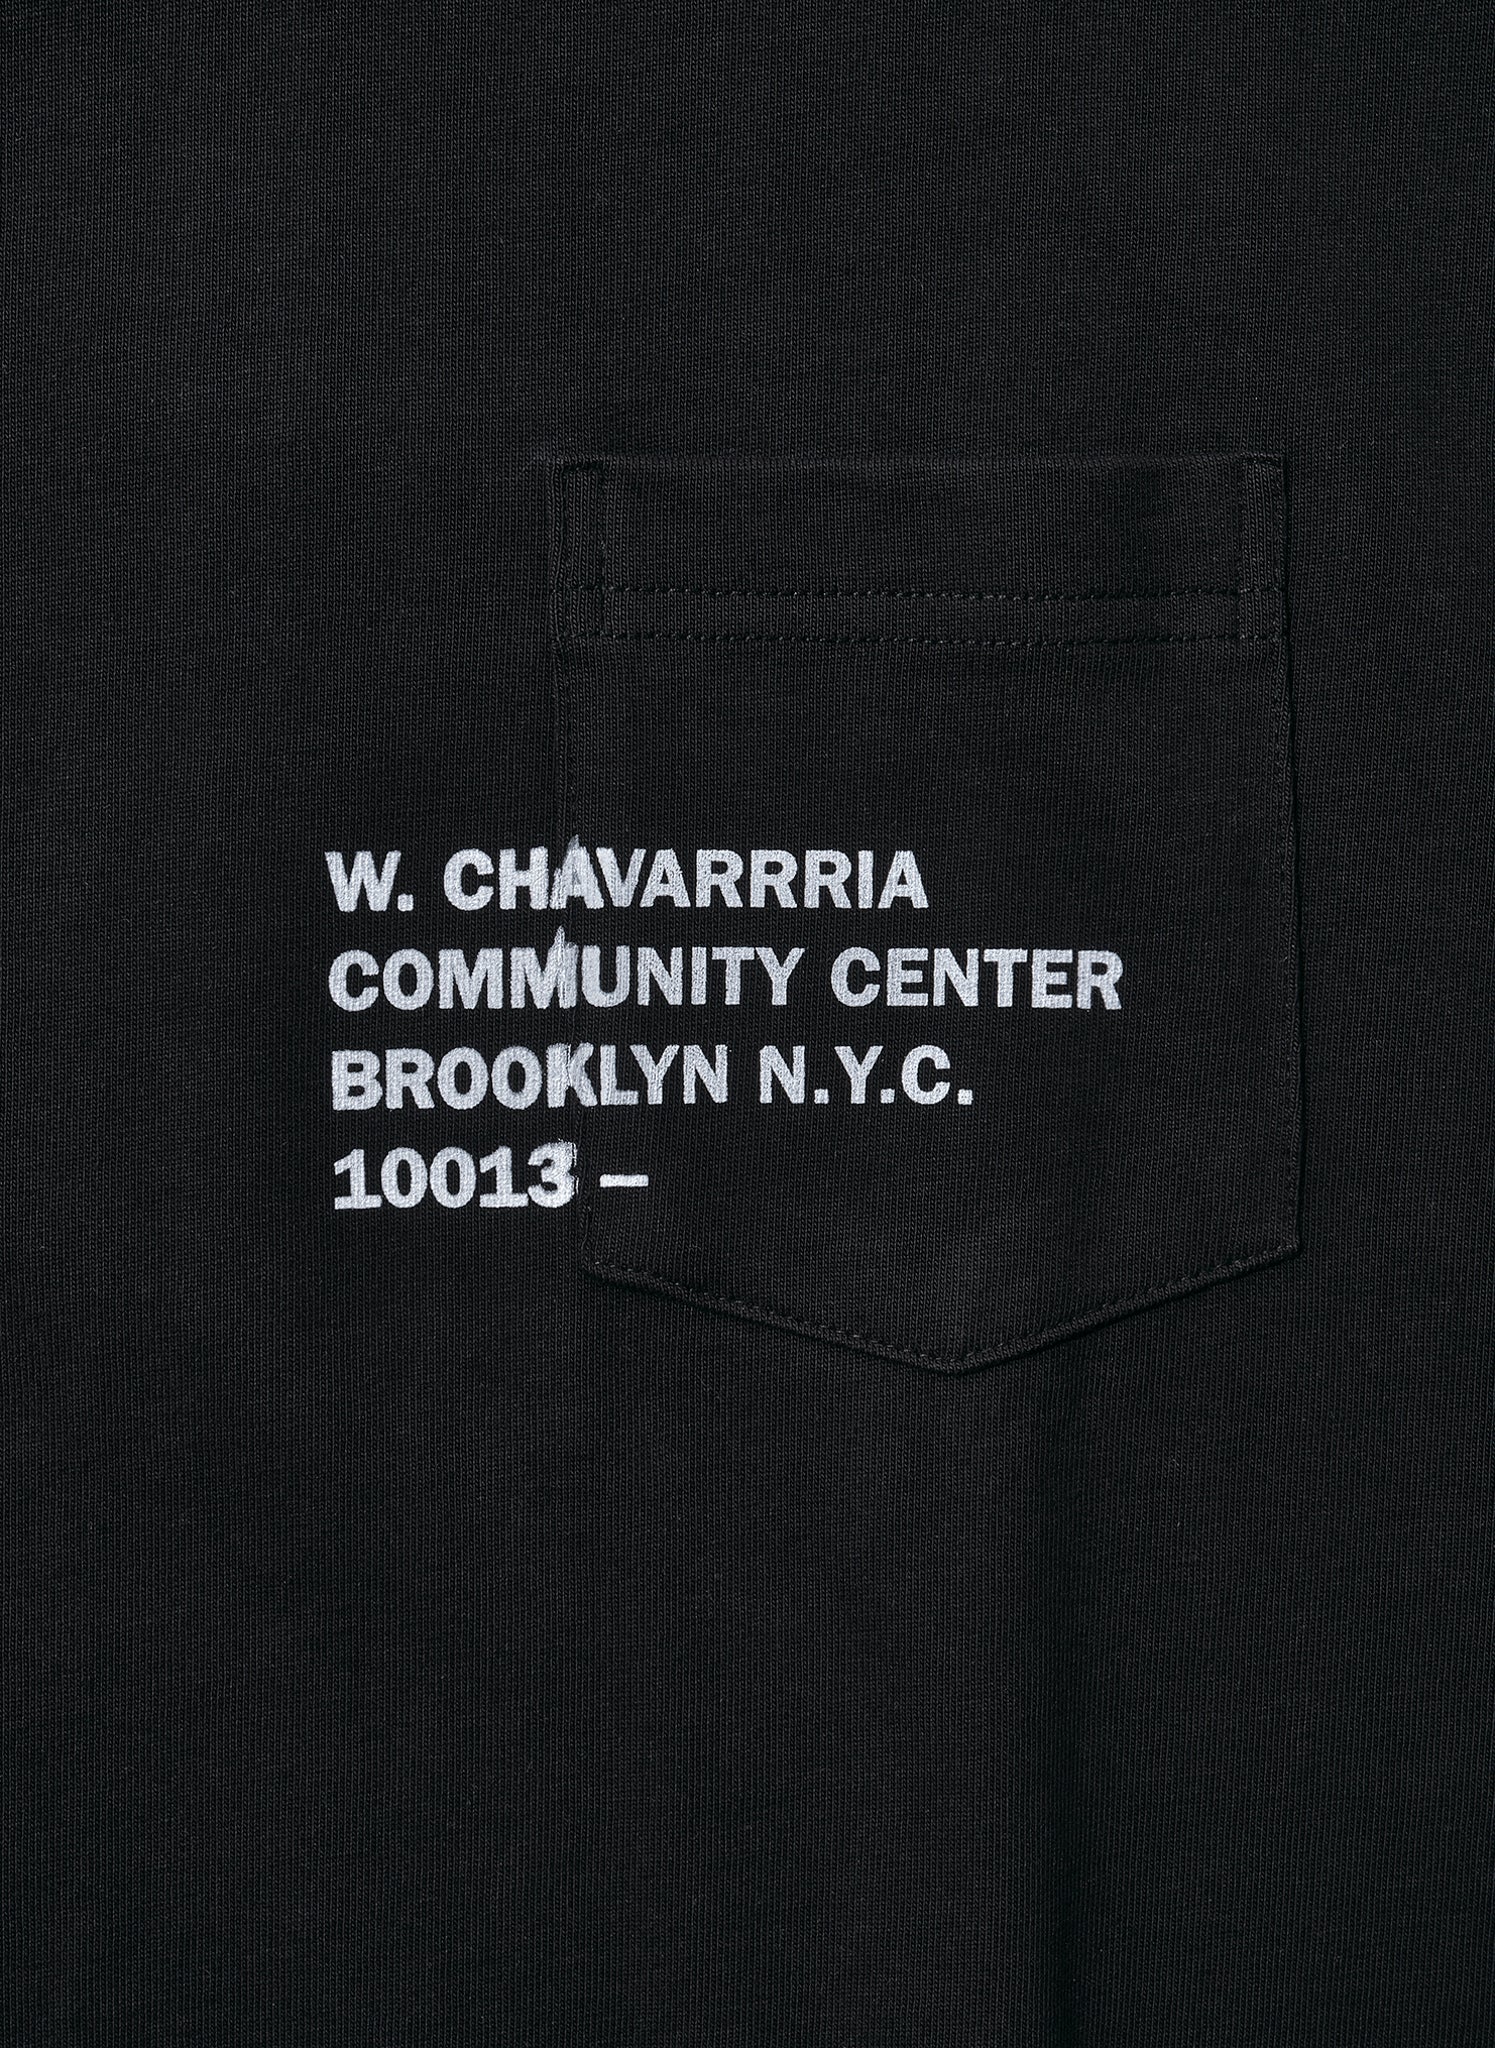 <span style="color: #f50b0b;">Last One</span> WILLY CHAVARRIA / CAR WASH T SOLID BLACK